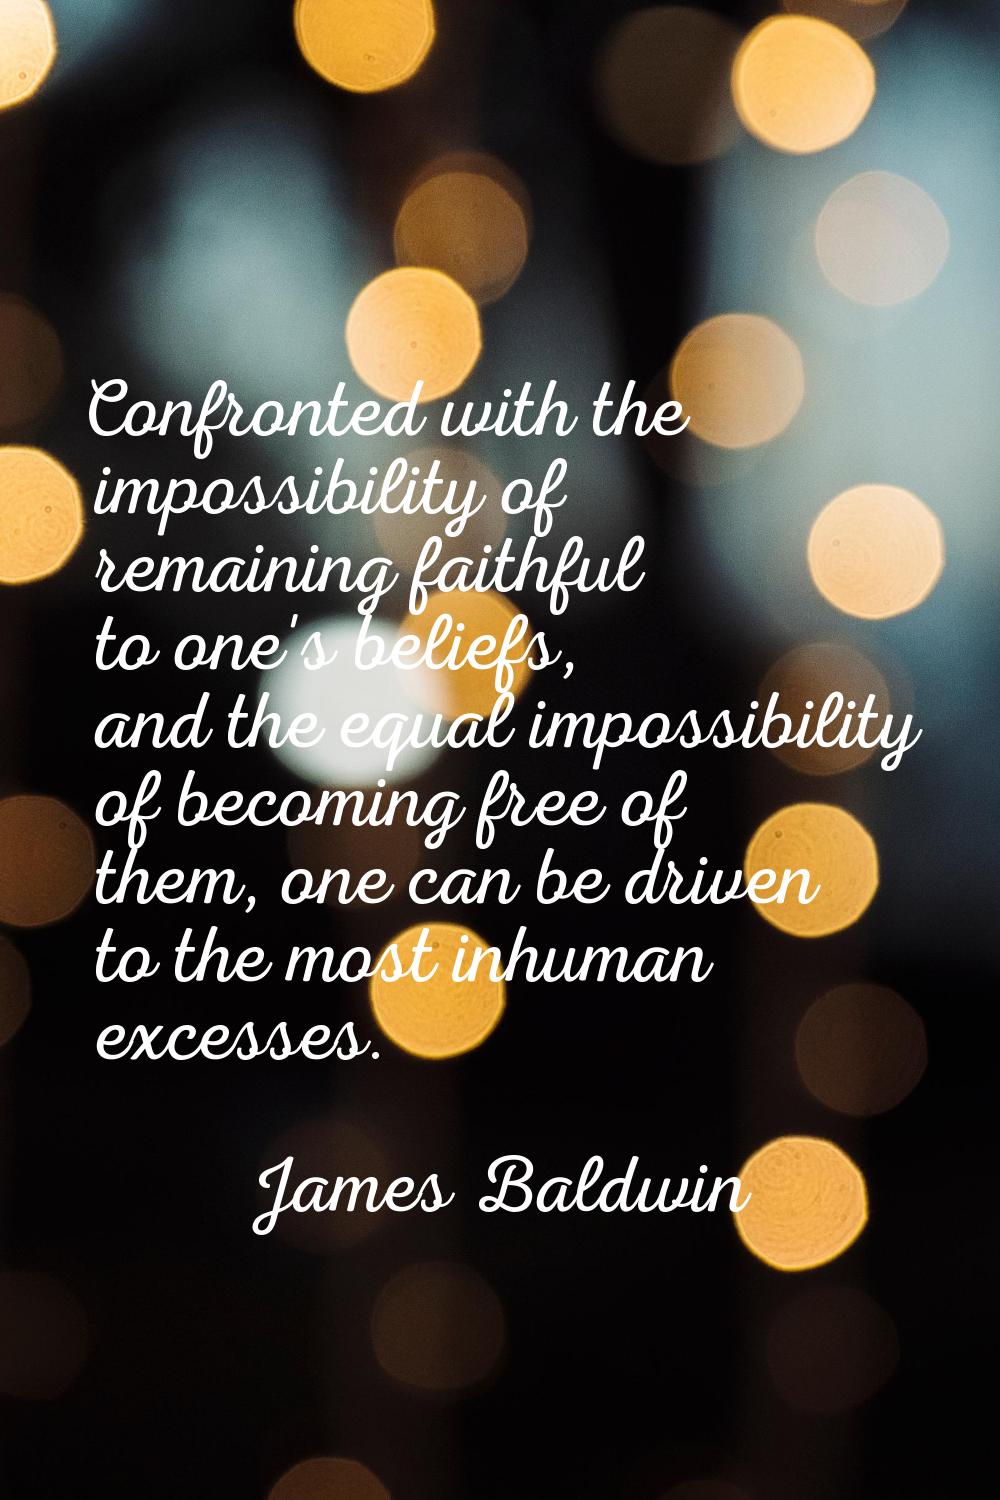 Confronted with the impossibility of remaining faithful to one's beliefs, and the equal impossibili